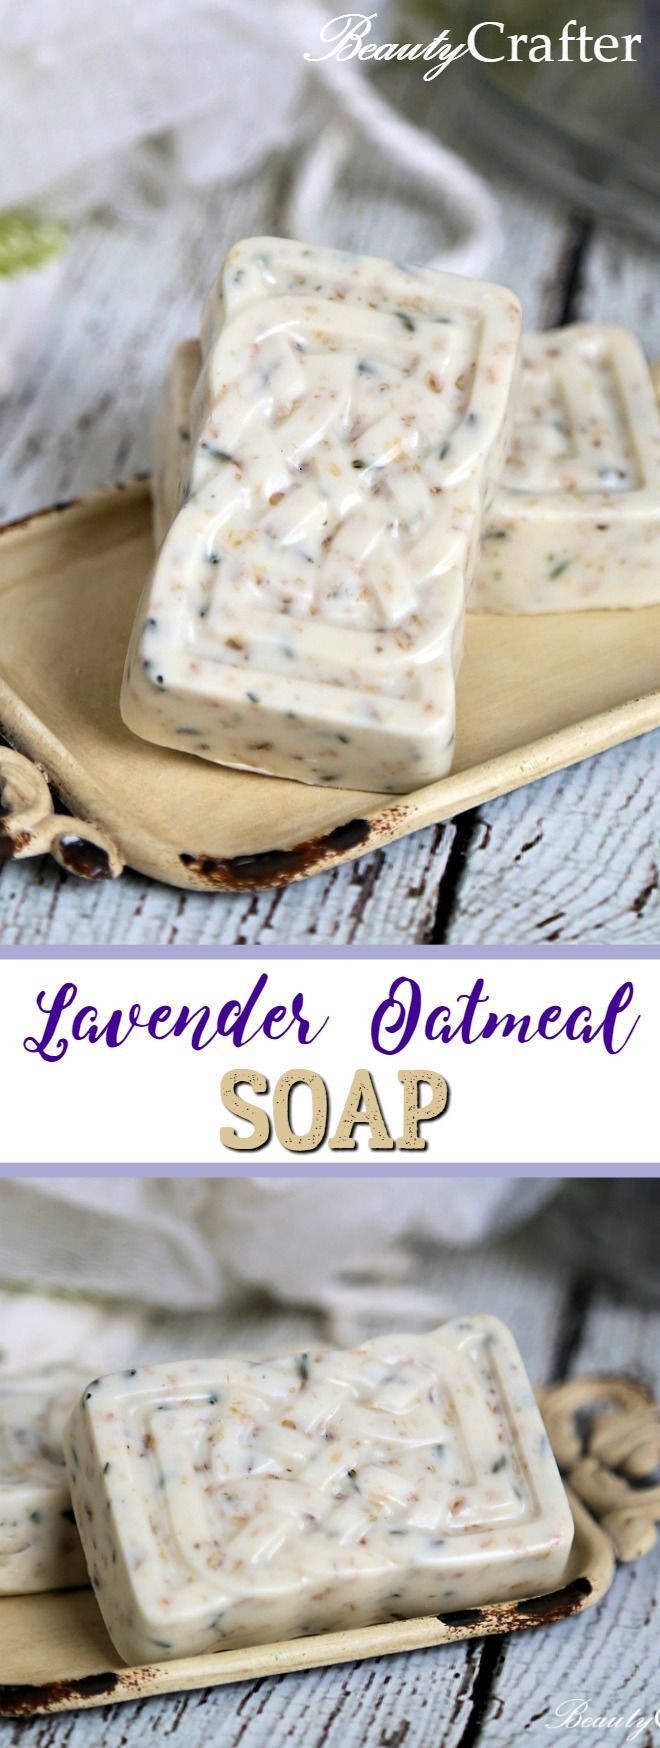 DIY Homemade Soap
 25 best ideas about Lavender soap on Pinterest